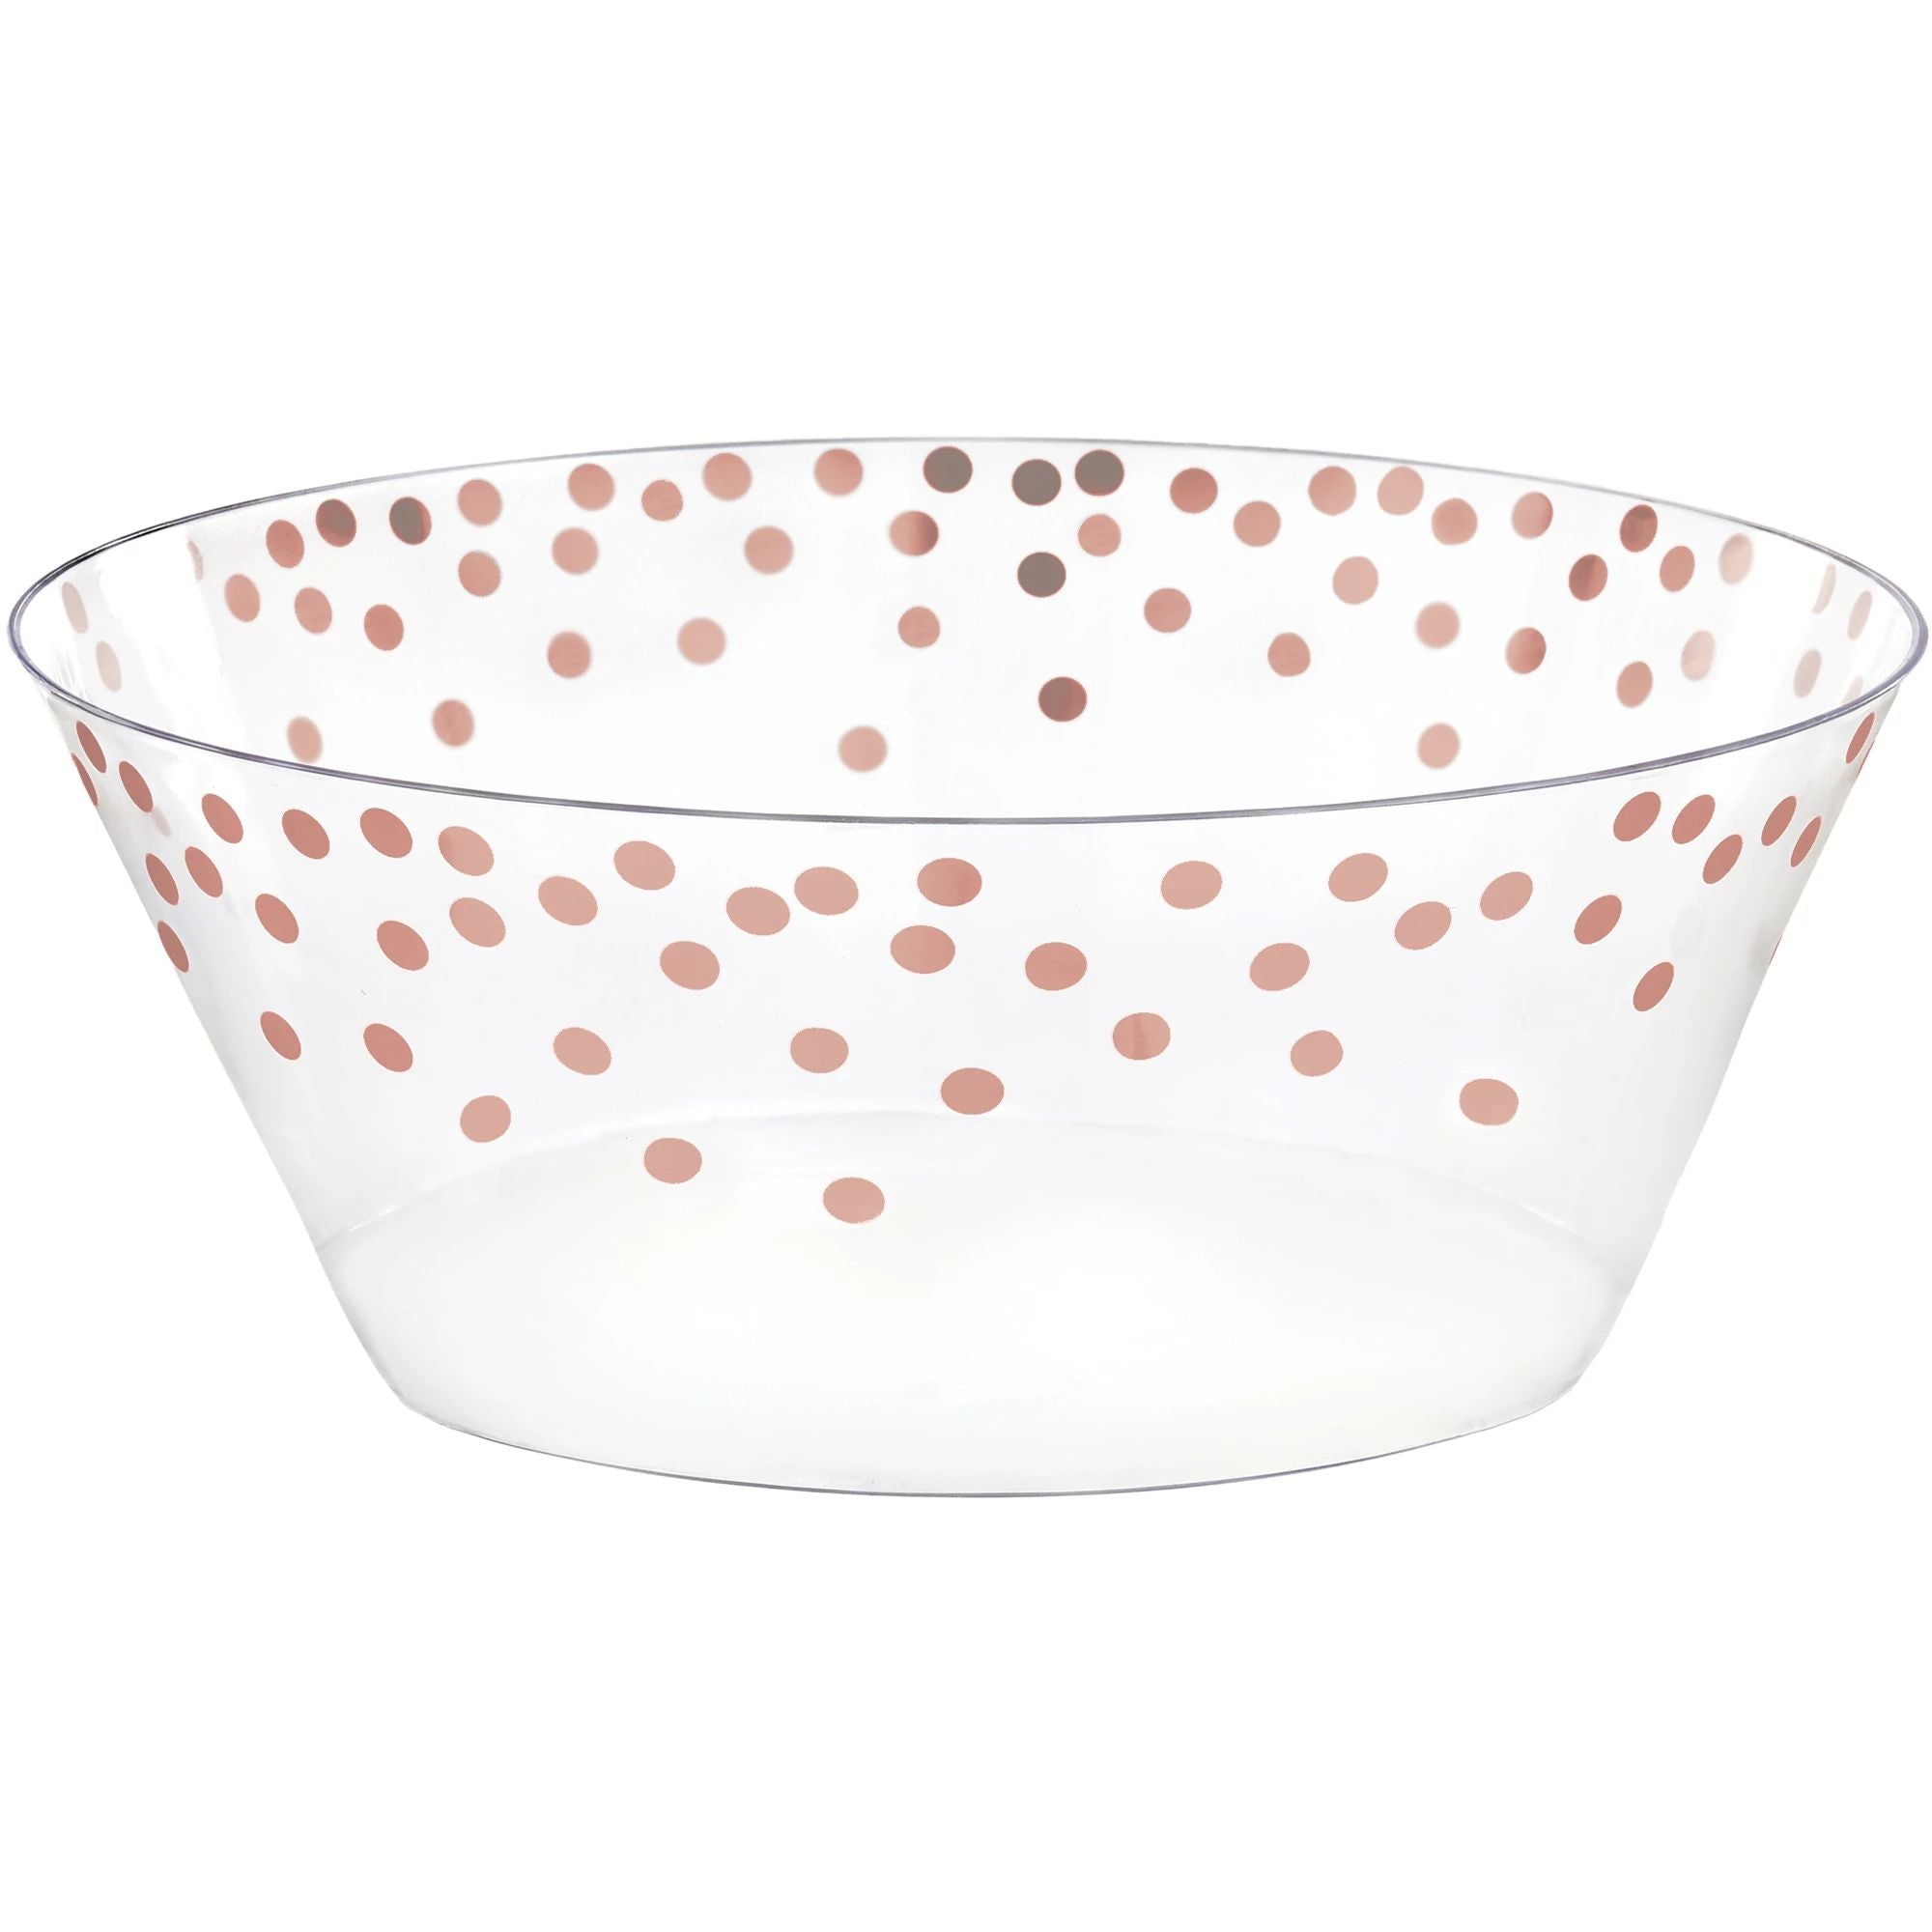 Small Serving Bowl, Recyclable - Rose Gold Dots